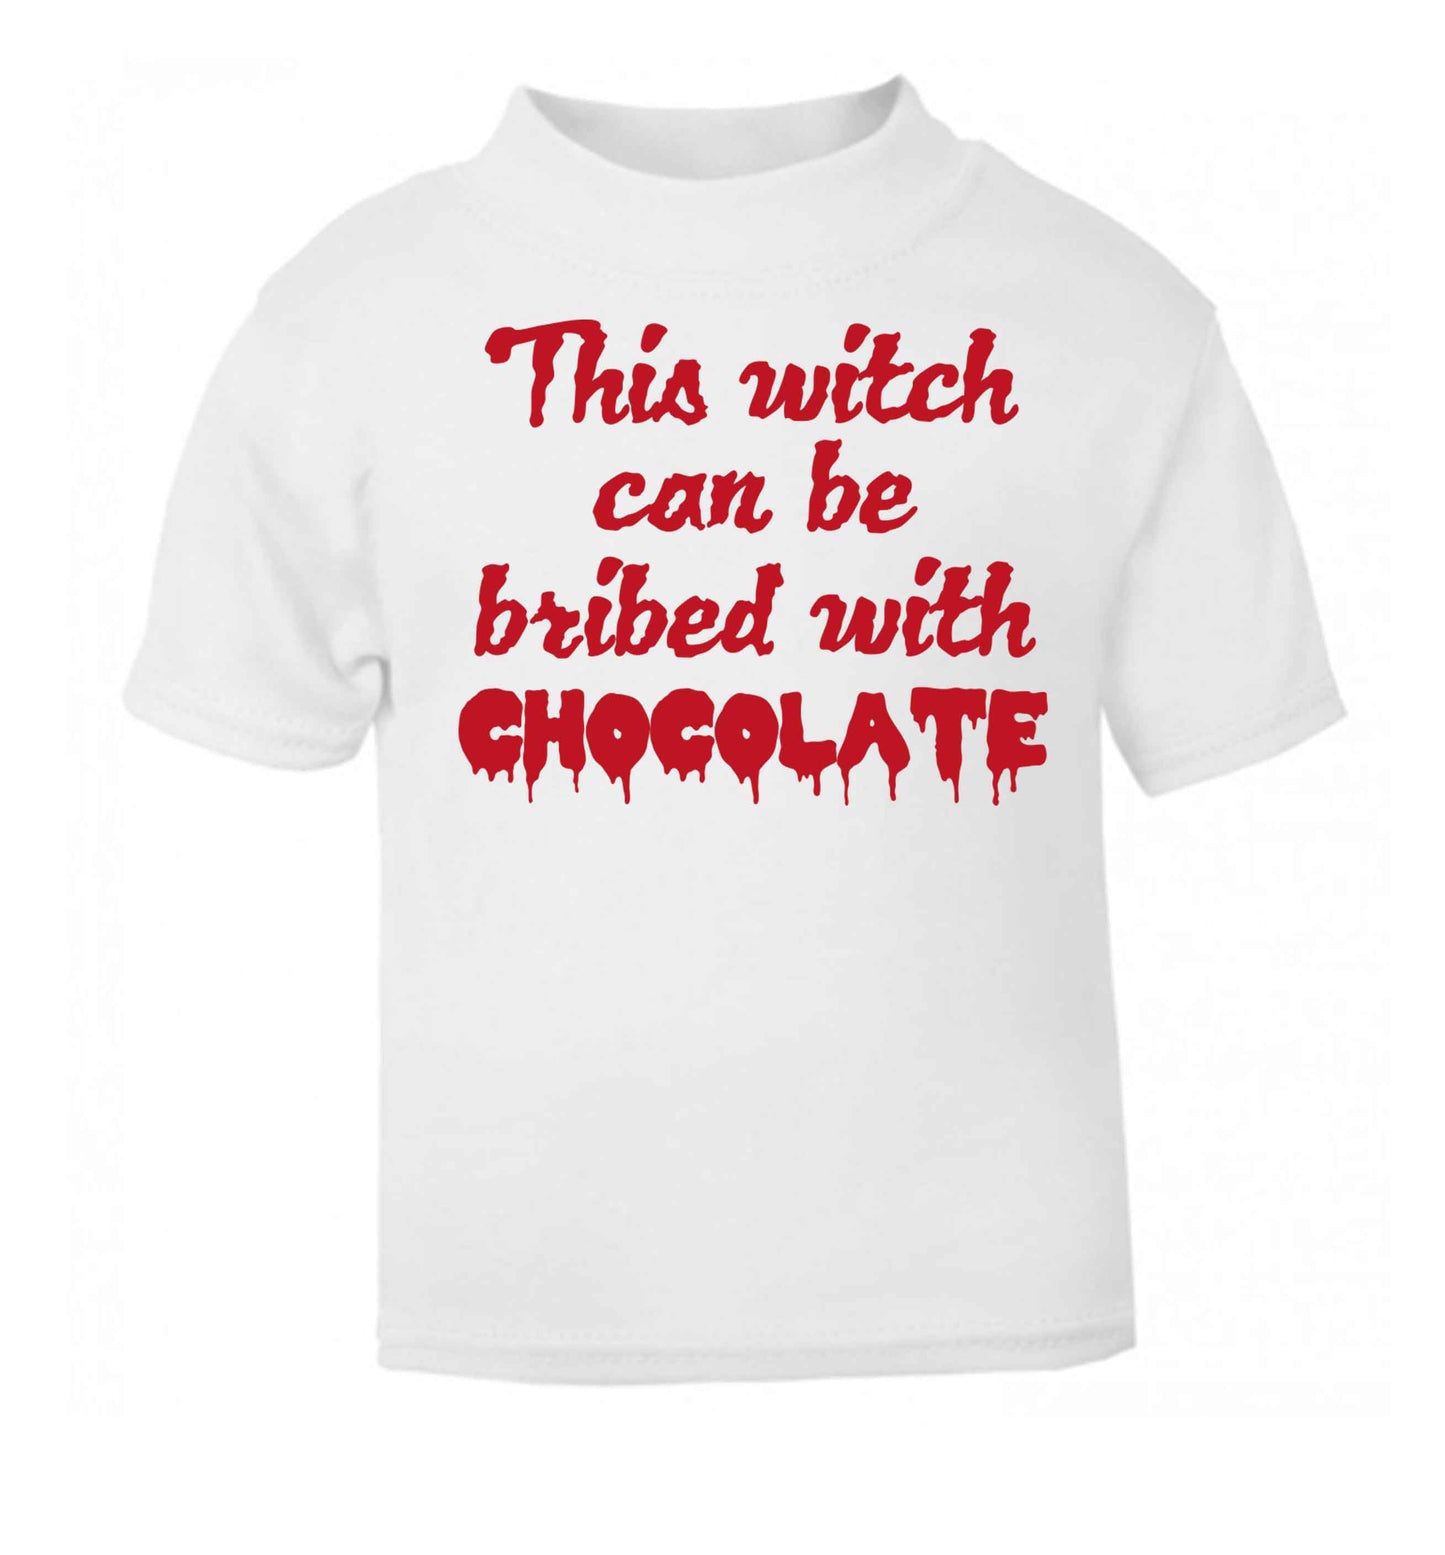 This witch can be bribed with chocolate white baby toddler Tshirt 2 Years